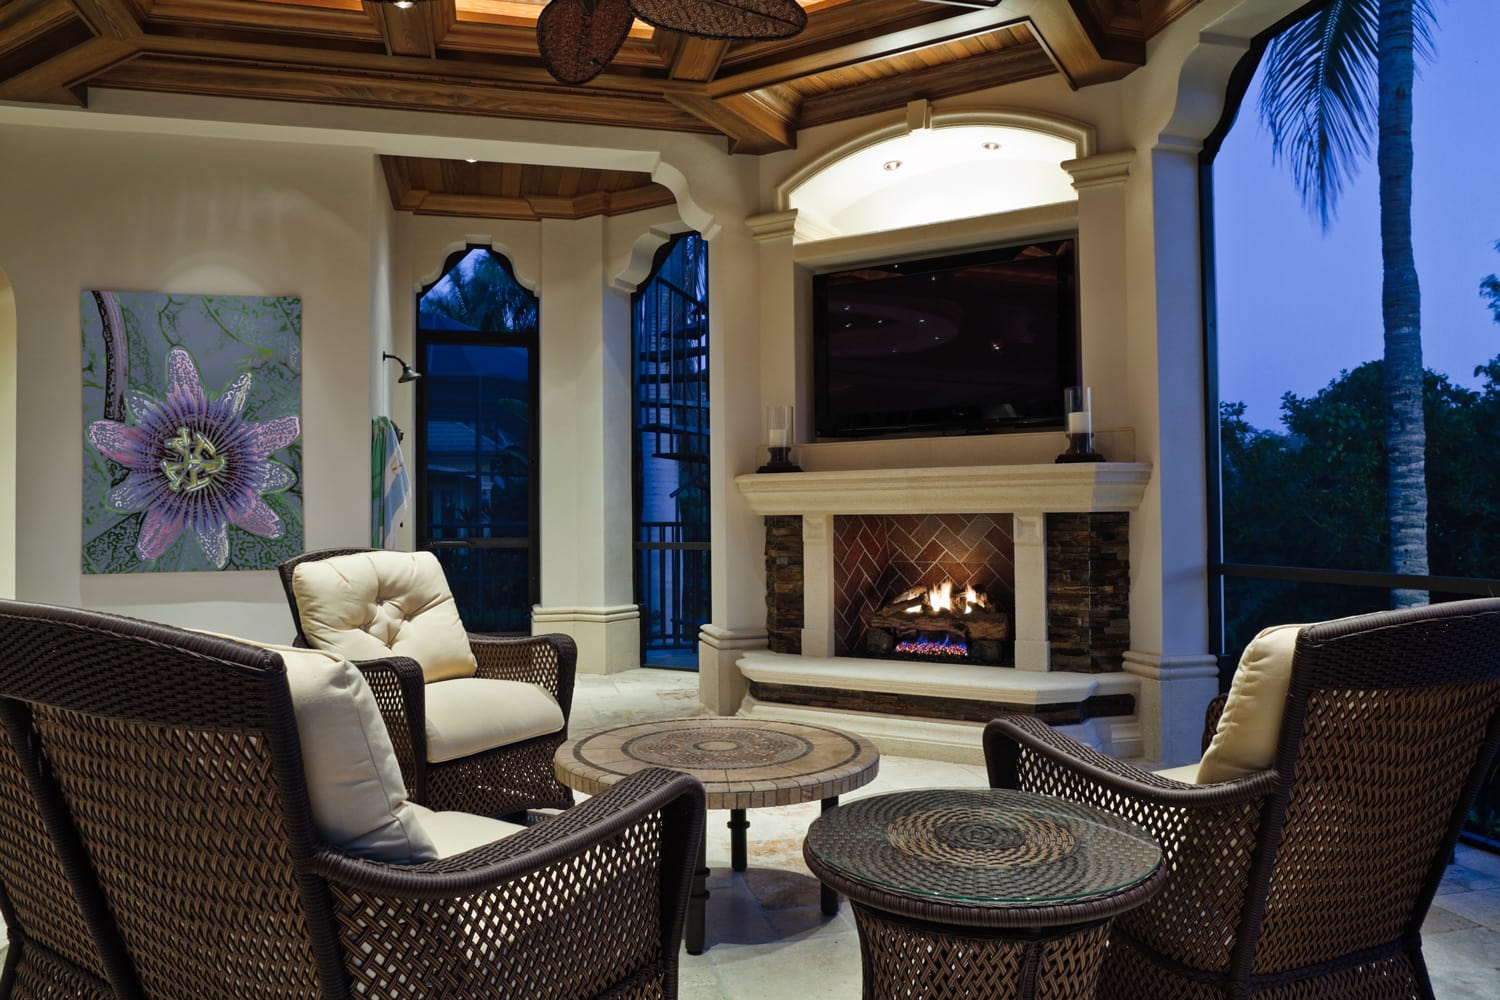 Outdoor sitting area with fireplace in a tropical setting at an estate home.